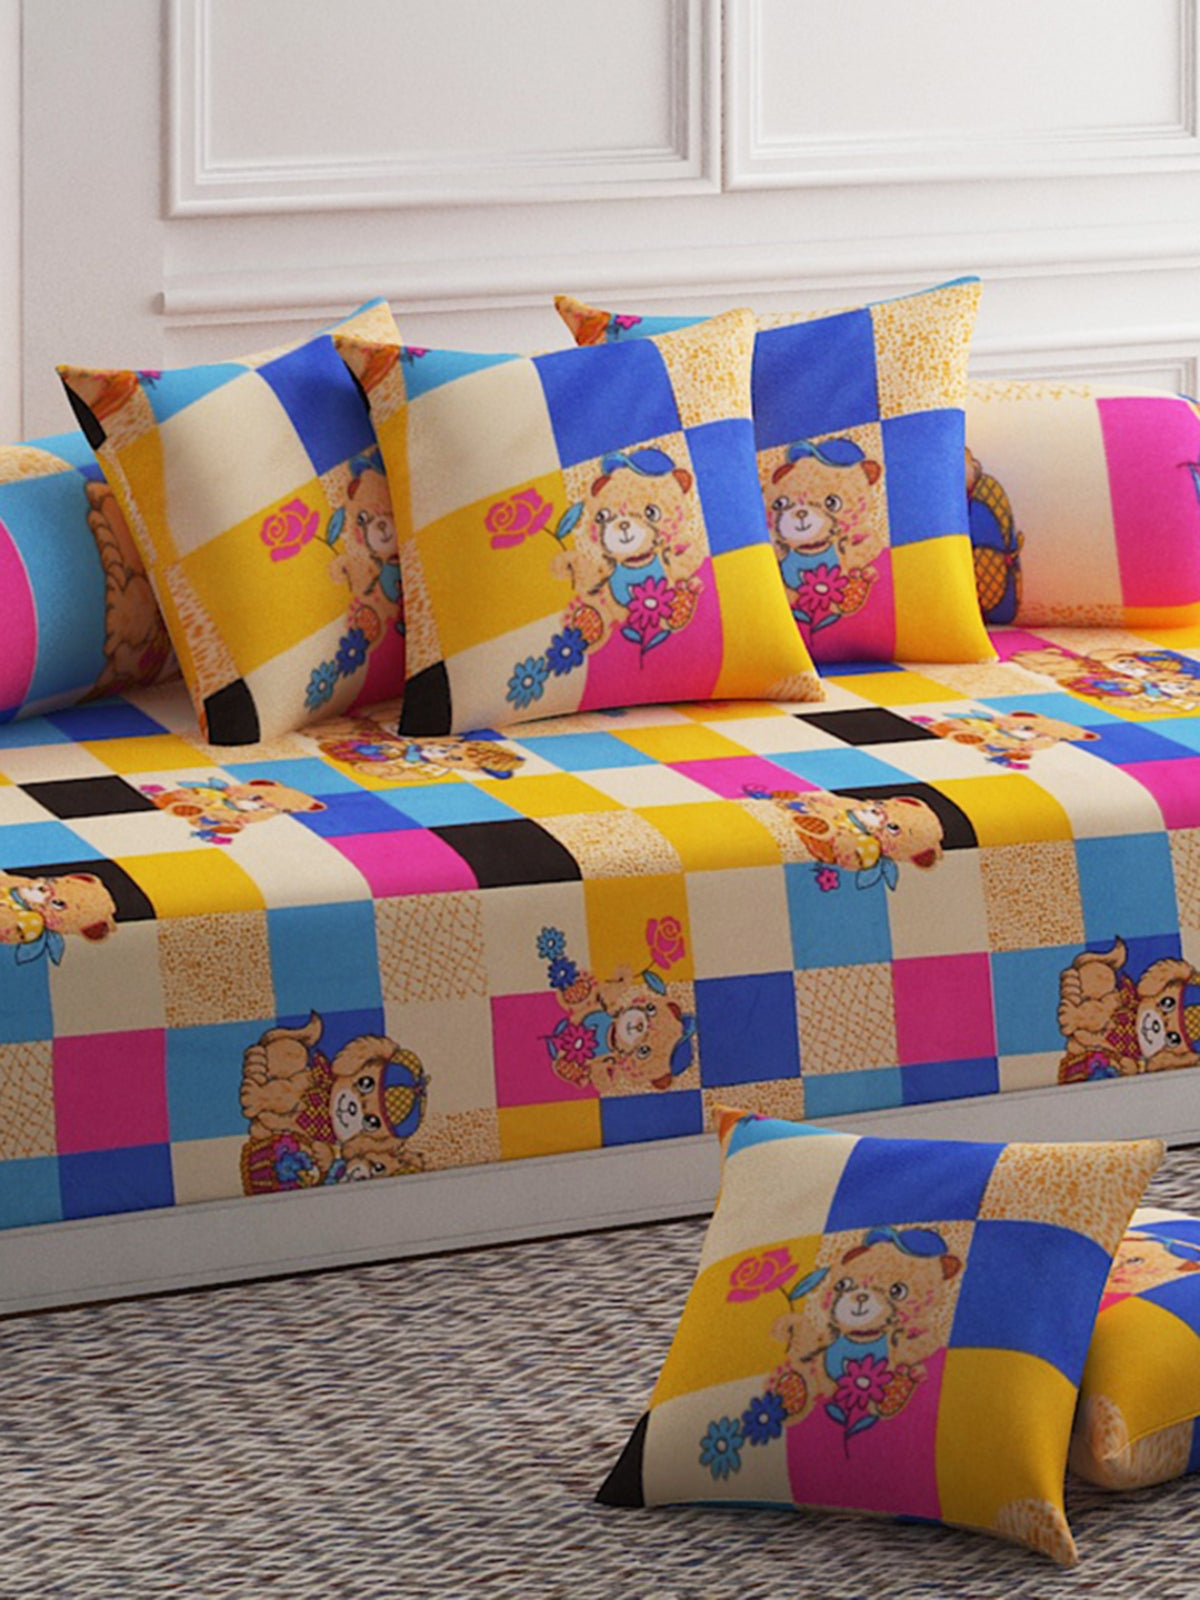 Teddy Printed Diwan Set with Bolster and Cushion Covers - Multicolor